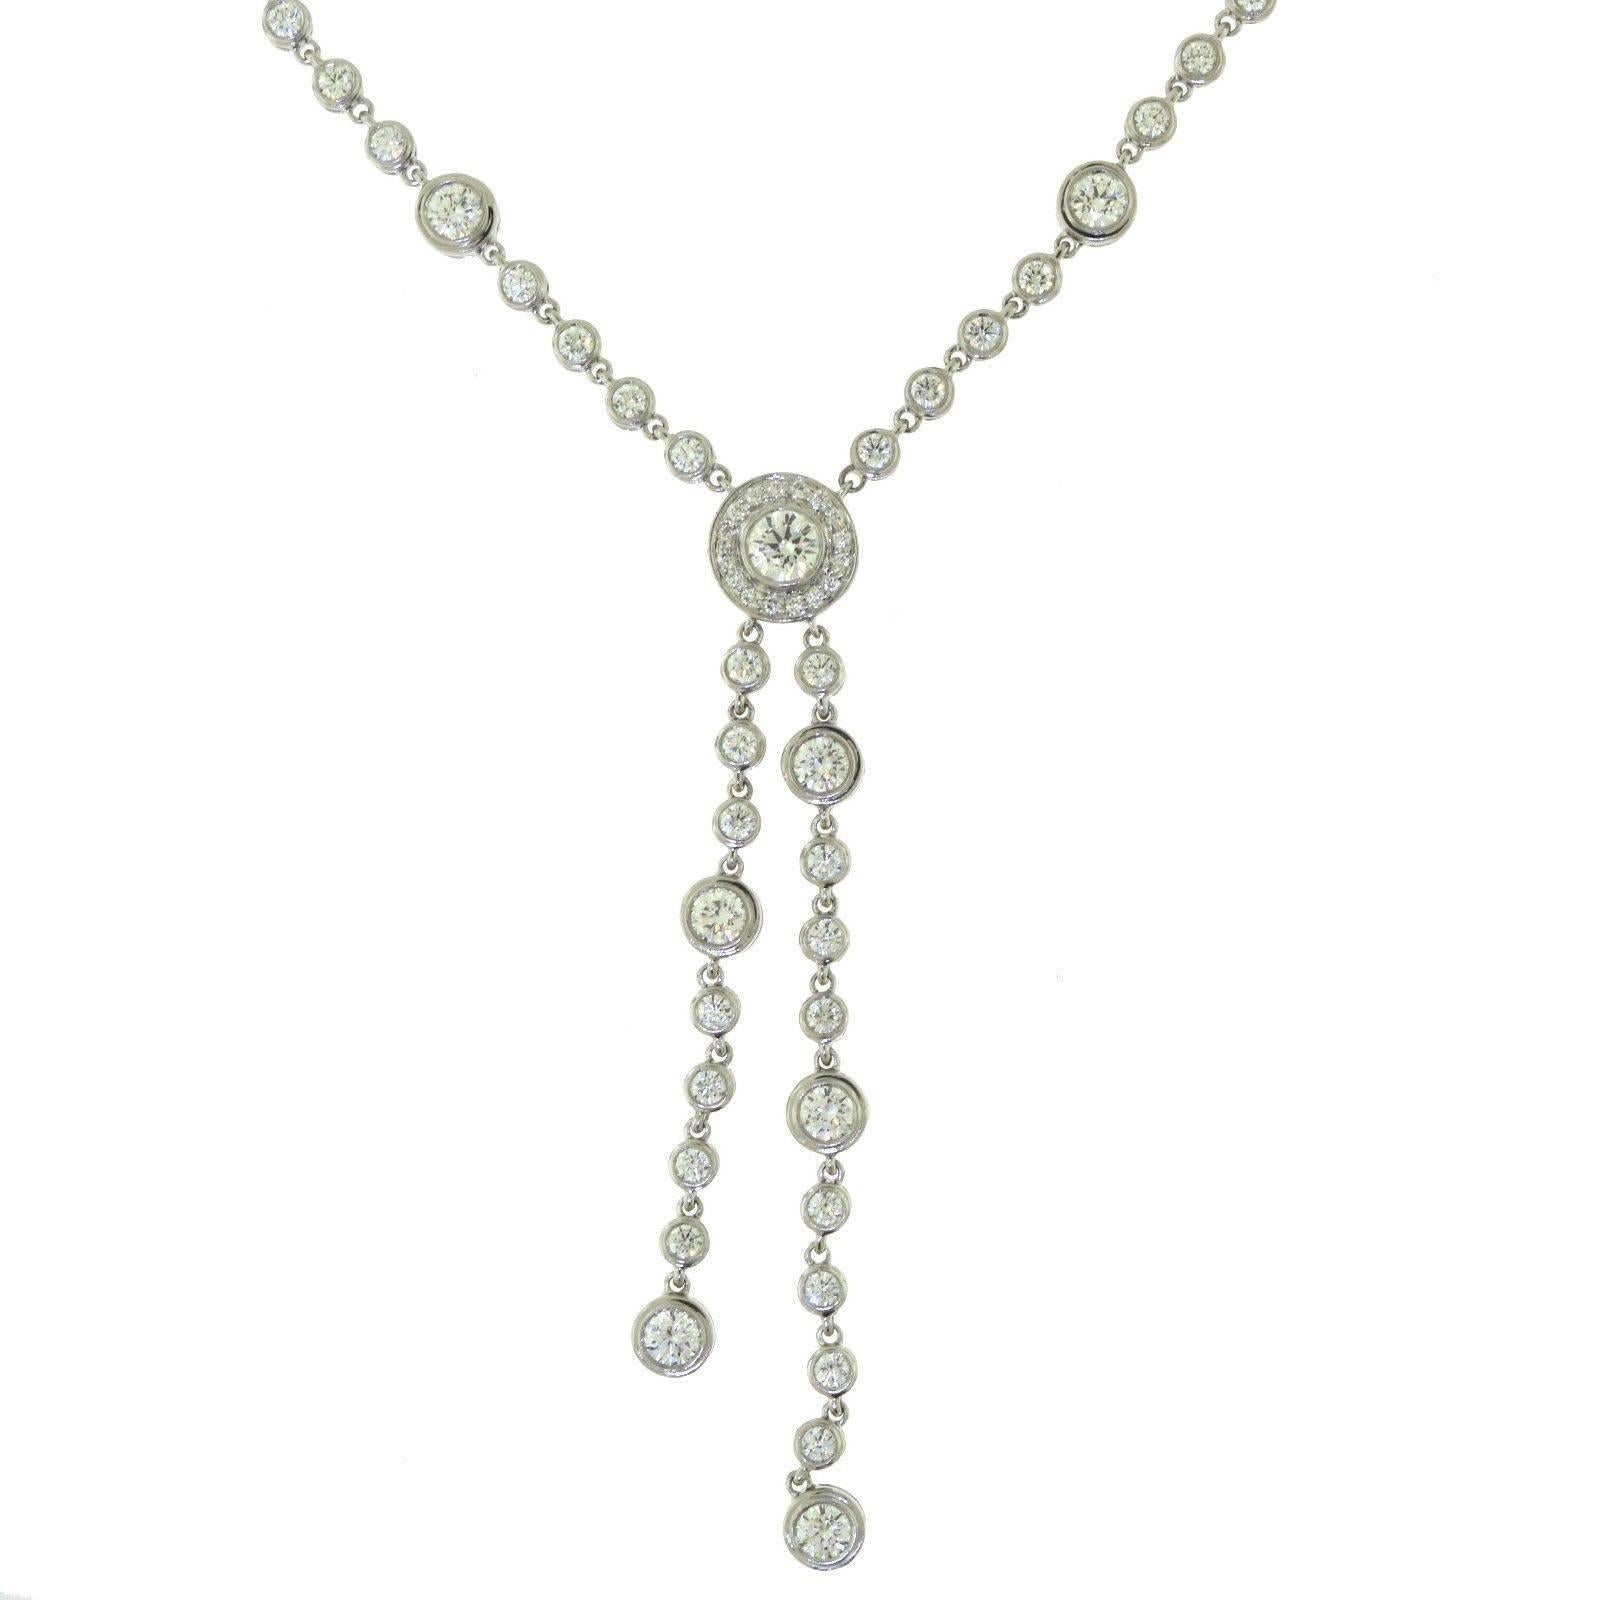 From Tiffany & Co.'s Tiffany Circlet collection with round brilliant cut diamonds set in platinum is this beautiful diamond drop necklace. Retail: $29,000.00

Diamond Color: F
Diamond Clarity: VVS
Total Carat Weight: 3.92 ct
Total Item Weight (g):